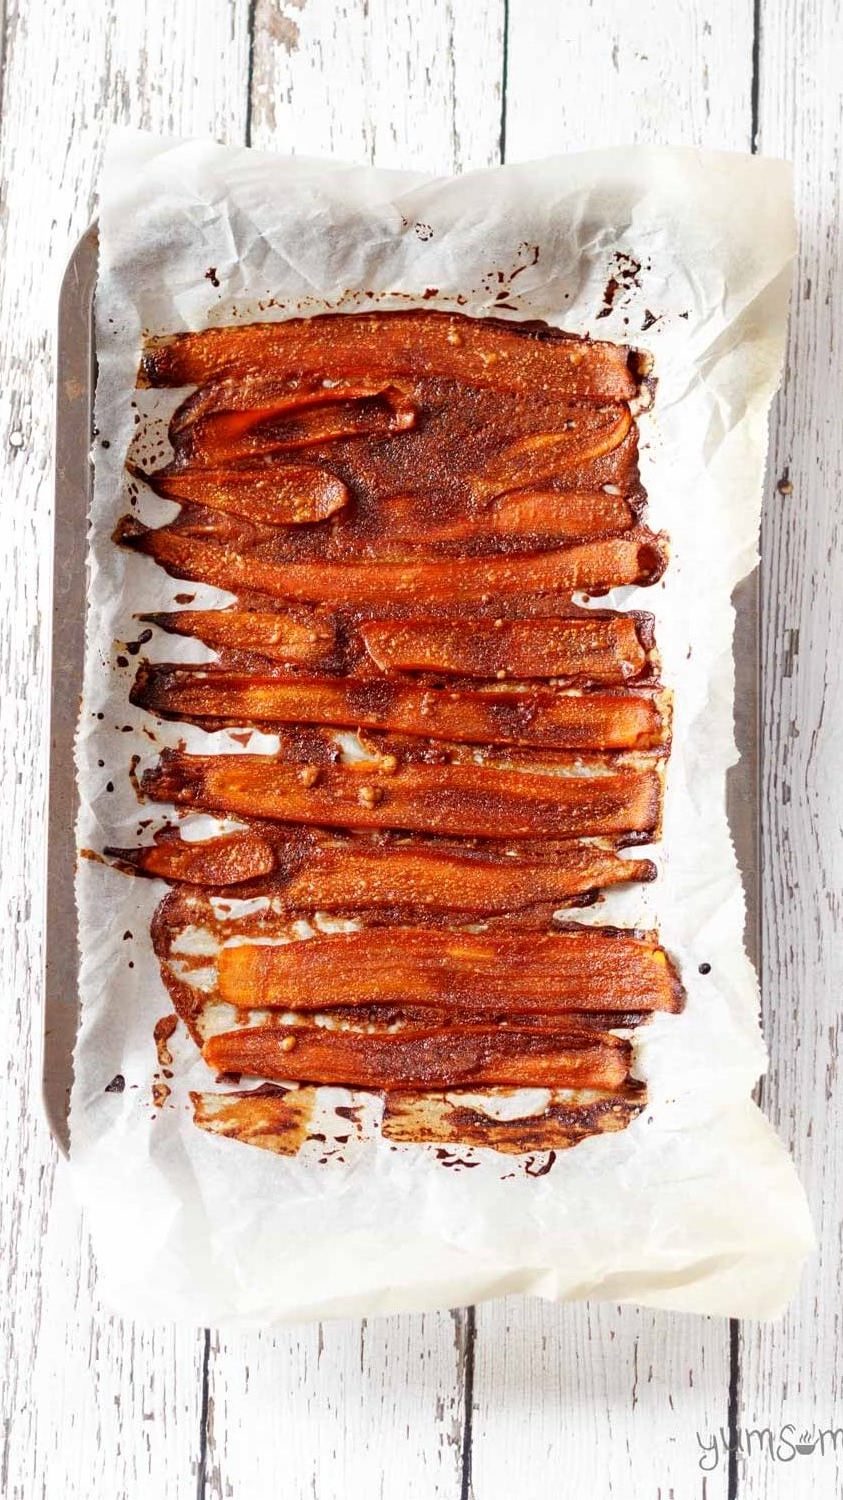 If Bacon Is Back, Should We Light One Up, Too?